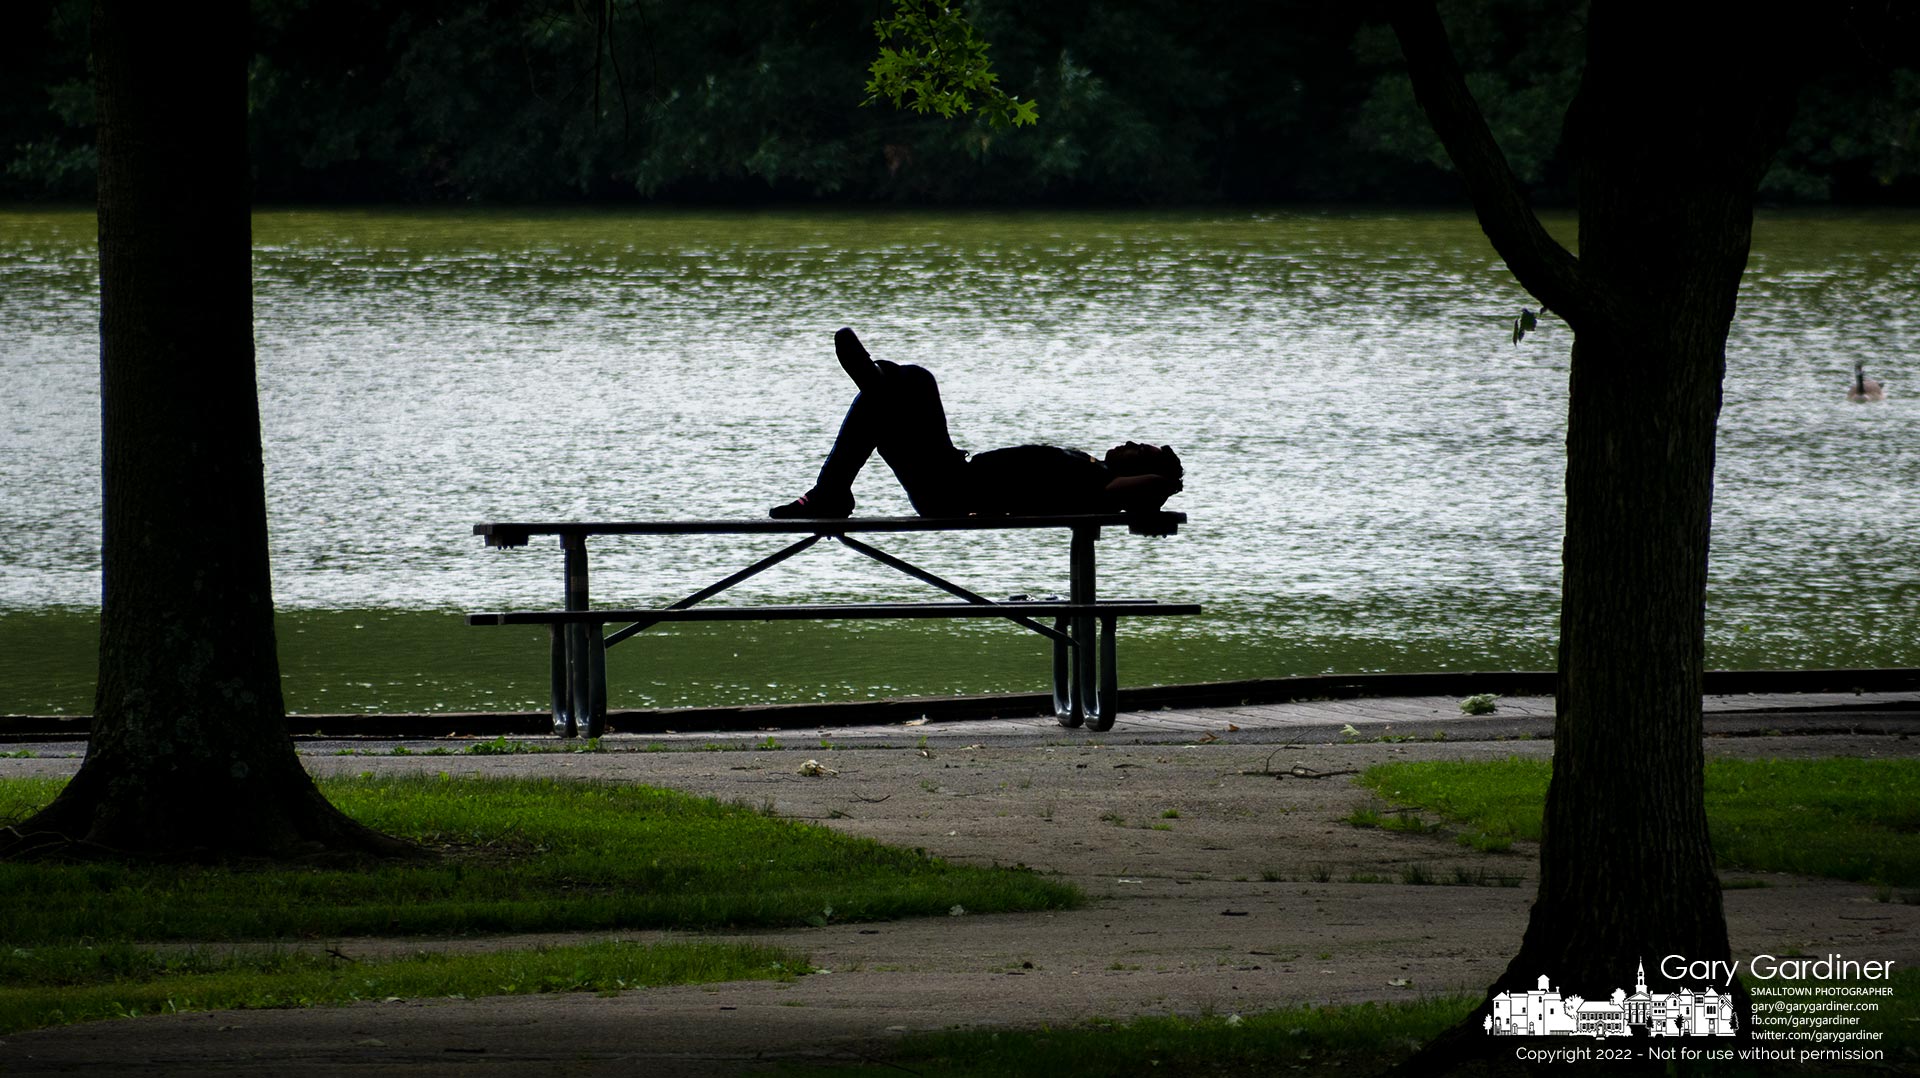 A man lies on a picnic table for a few minutes of rest on a warm day at the dock on Schrock Lake at Sharon Woods Metro Park. My Final Photo for June 16, 2022.